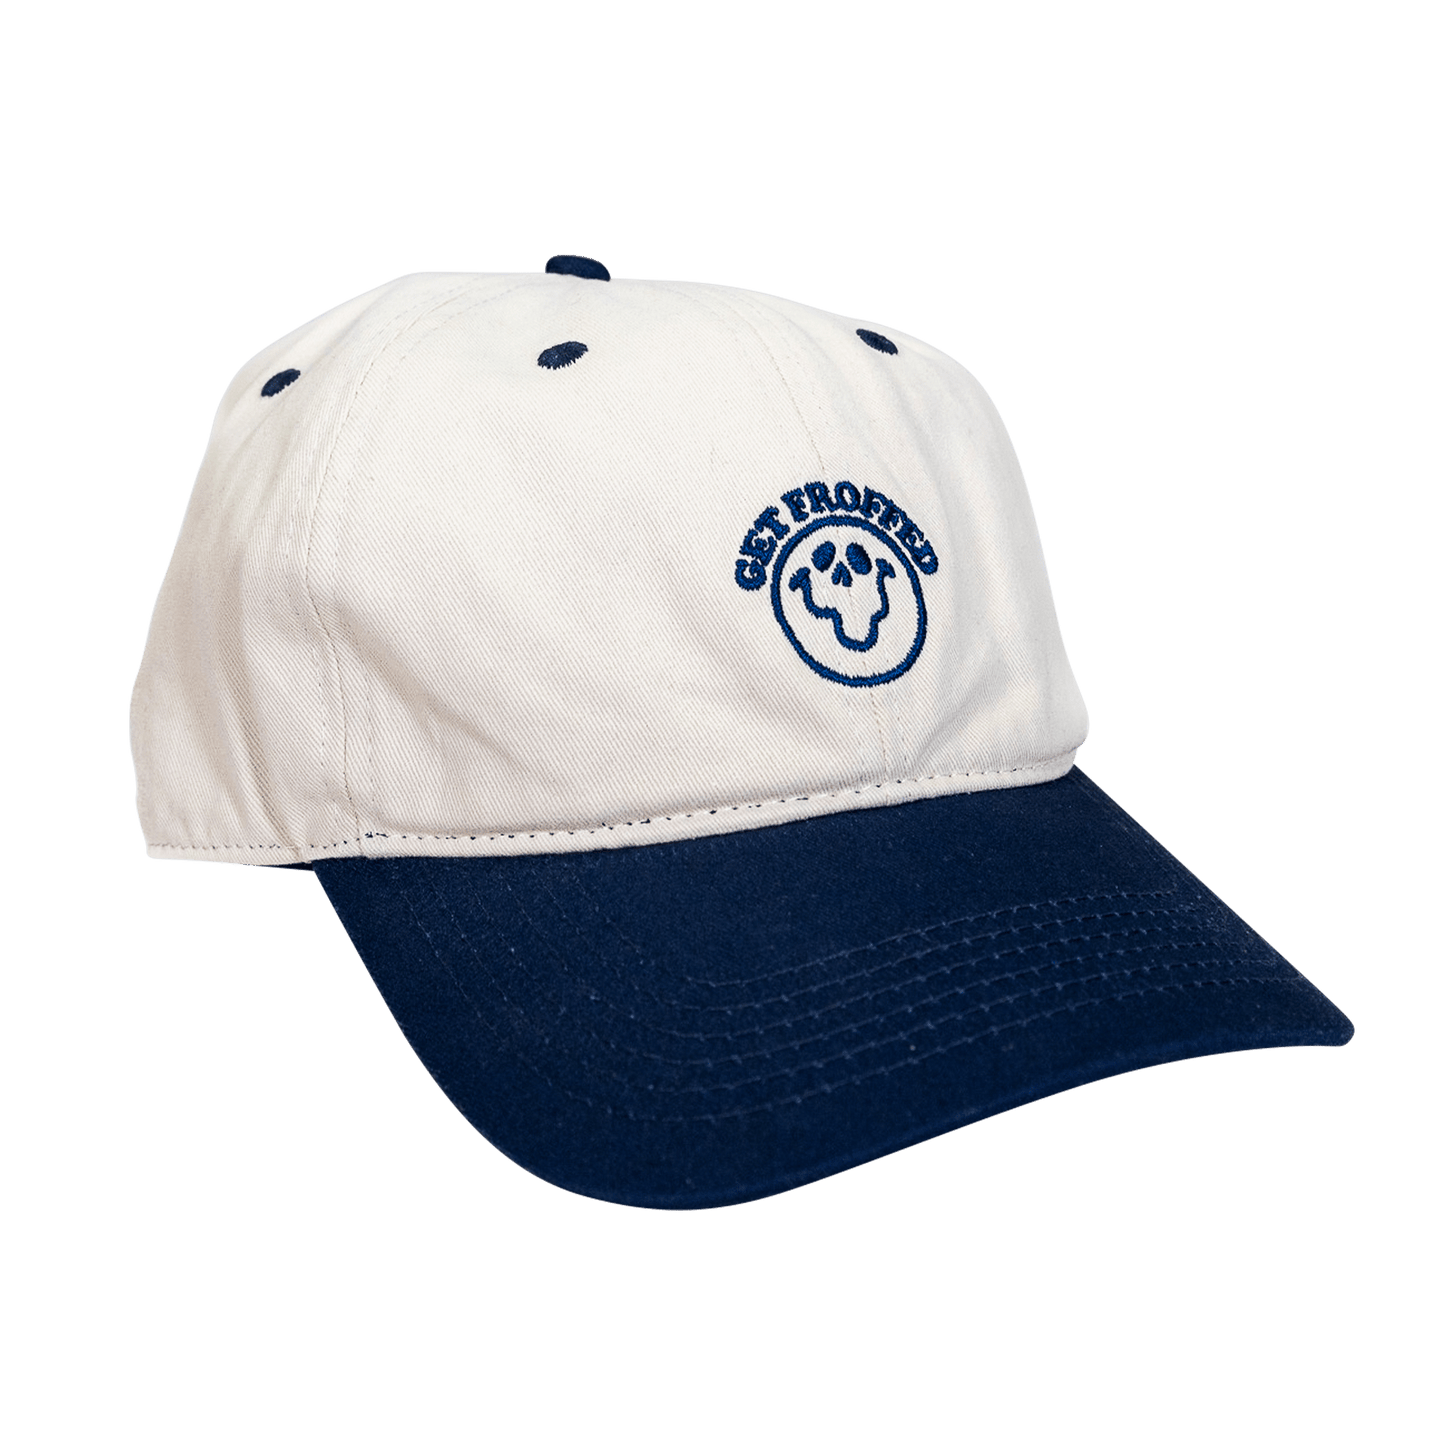 Get Froffed 3 Baseball Cap Cap Frothies